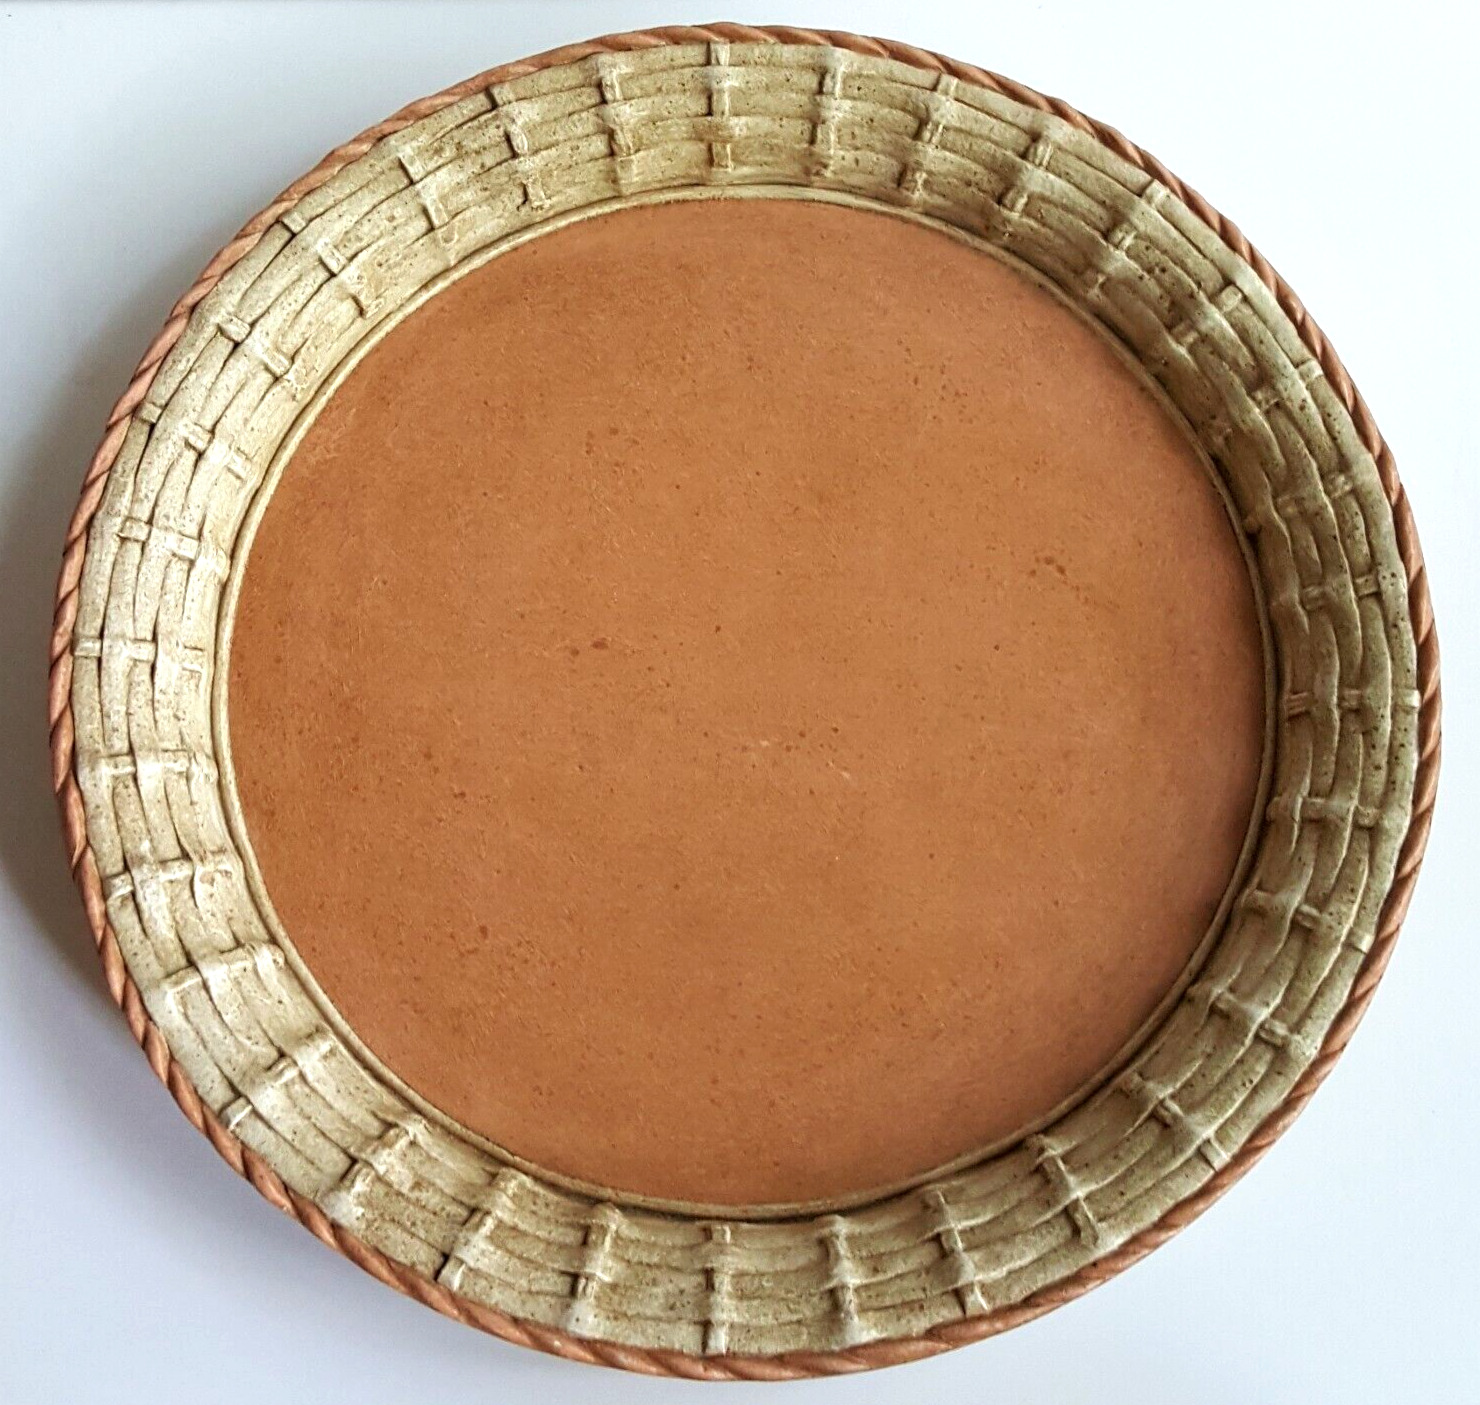 Ethan Allen Large Faux Wicker and Terracotta Color Tray Platter Rope Rim Italy